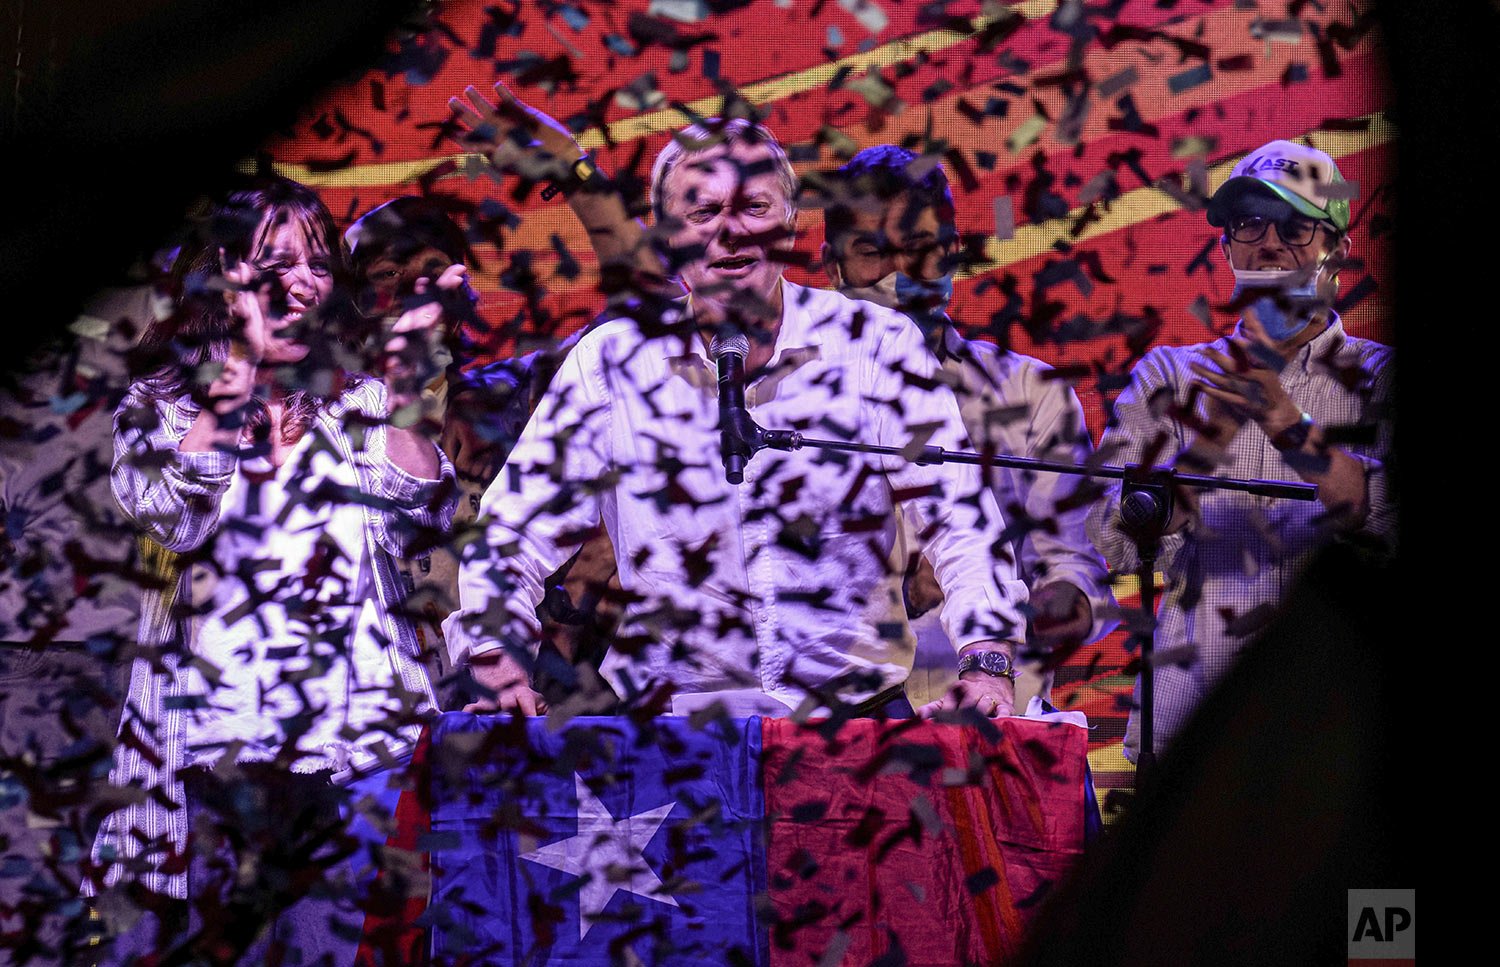  Showered by confetti, Republican Party presidential candidate Jose Antonio Kast stands next to his wife Maria Pia Adriasola at his closing campaign rally ahead of the presidential run-off election in Santiago, Chile, Dec. 16, 2021. (AP Photo/Esteban